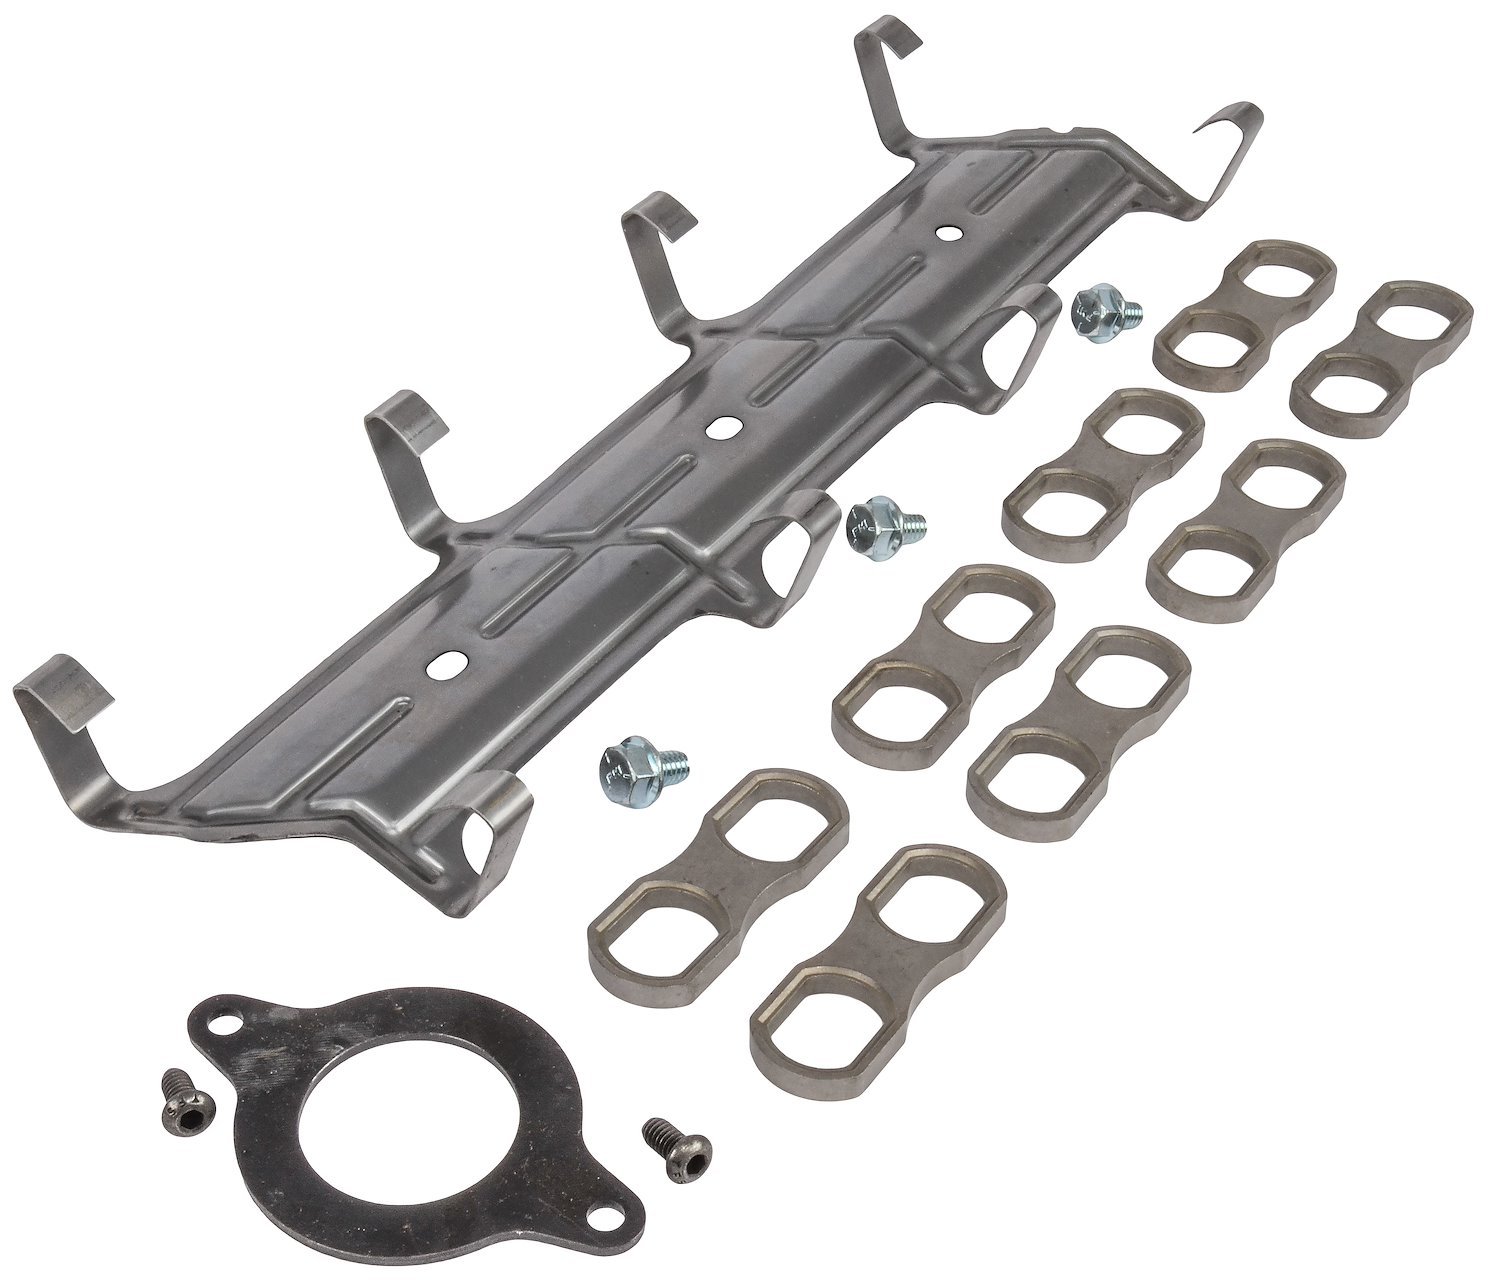 Roller Lifter Retainer Kit for 1986-1990 Small Block Chevy